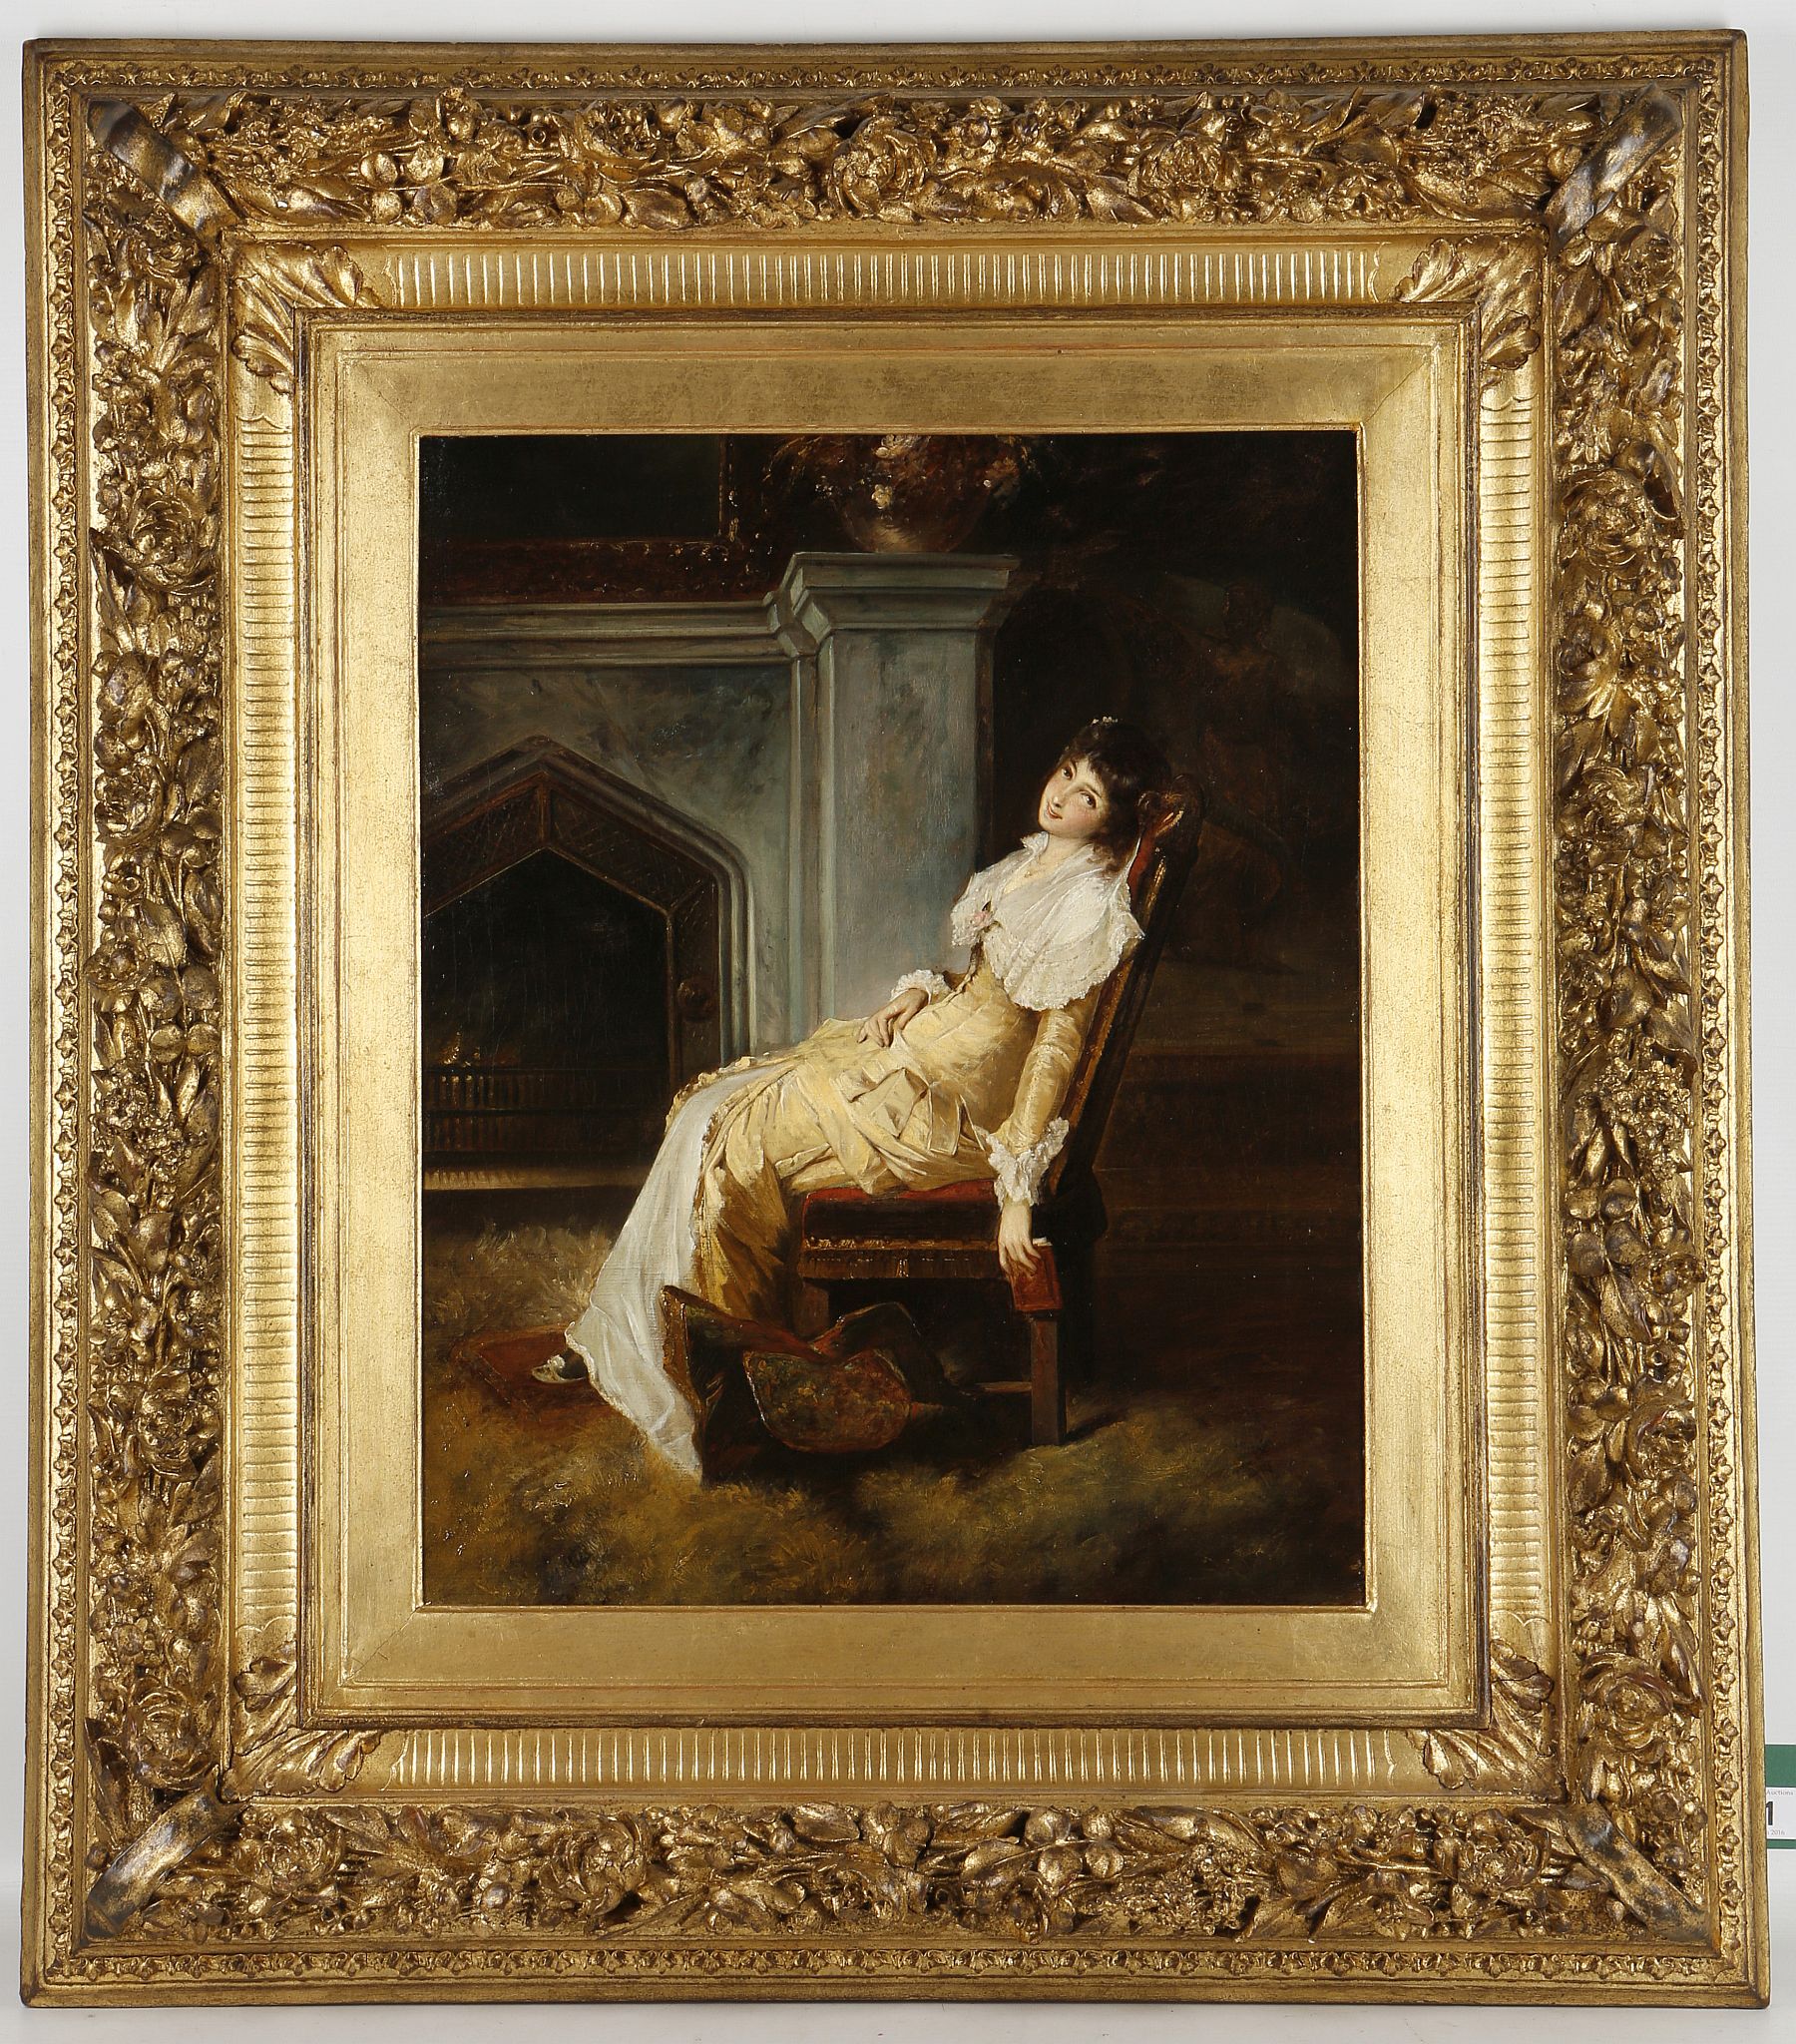 Attributed to Charles Louis Baugniet 1814-1886. 'Expectations'. Oil on canvas. A young woman in